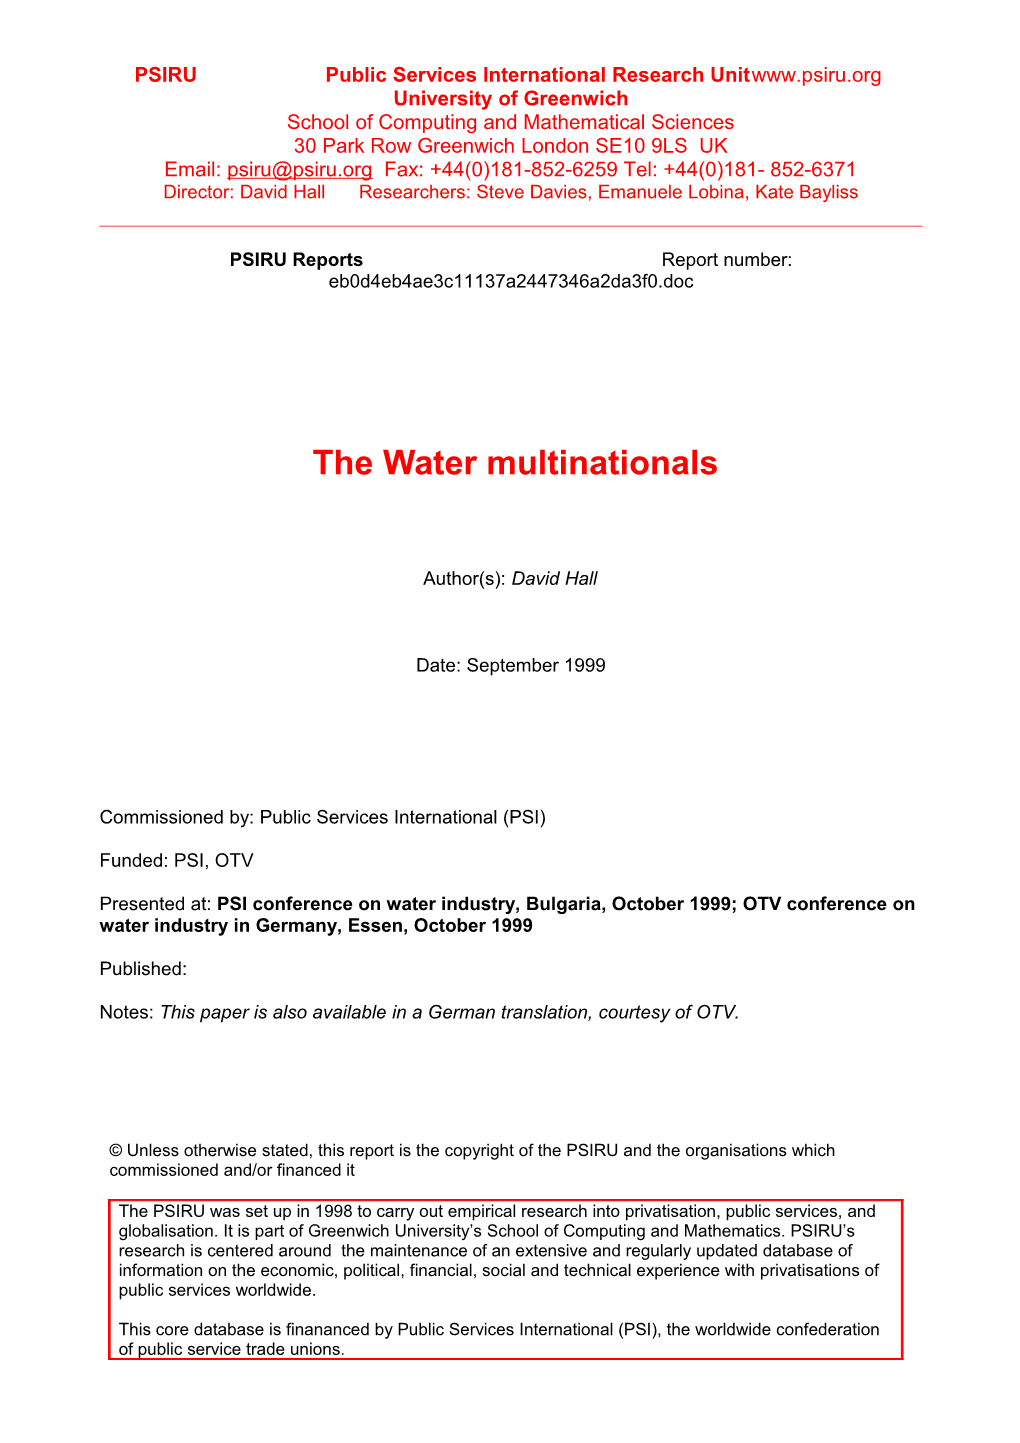 The Water Multinationals